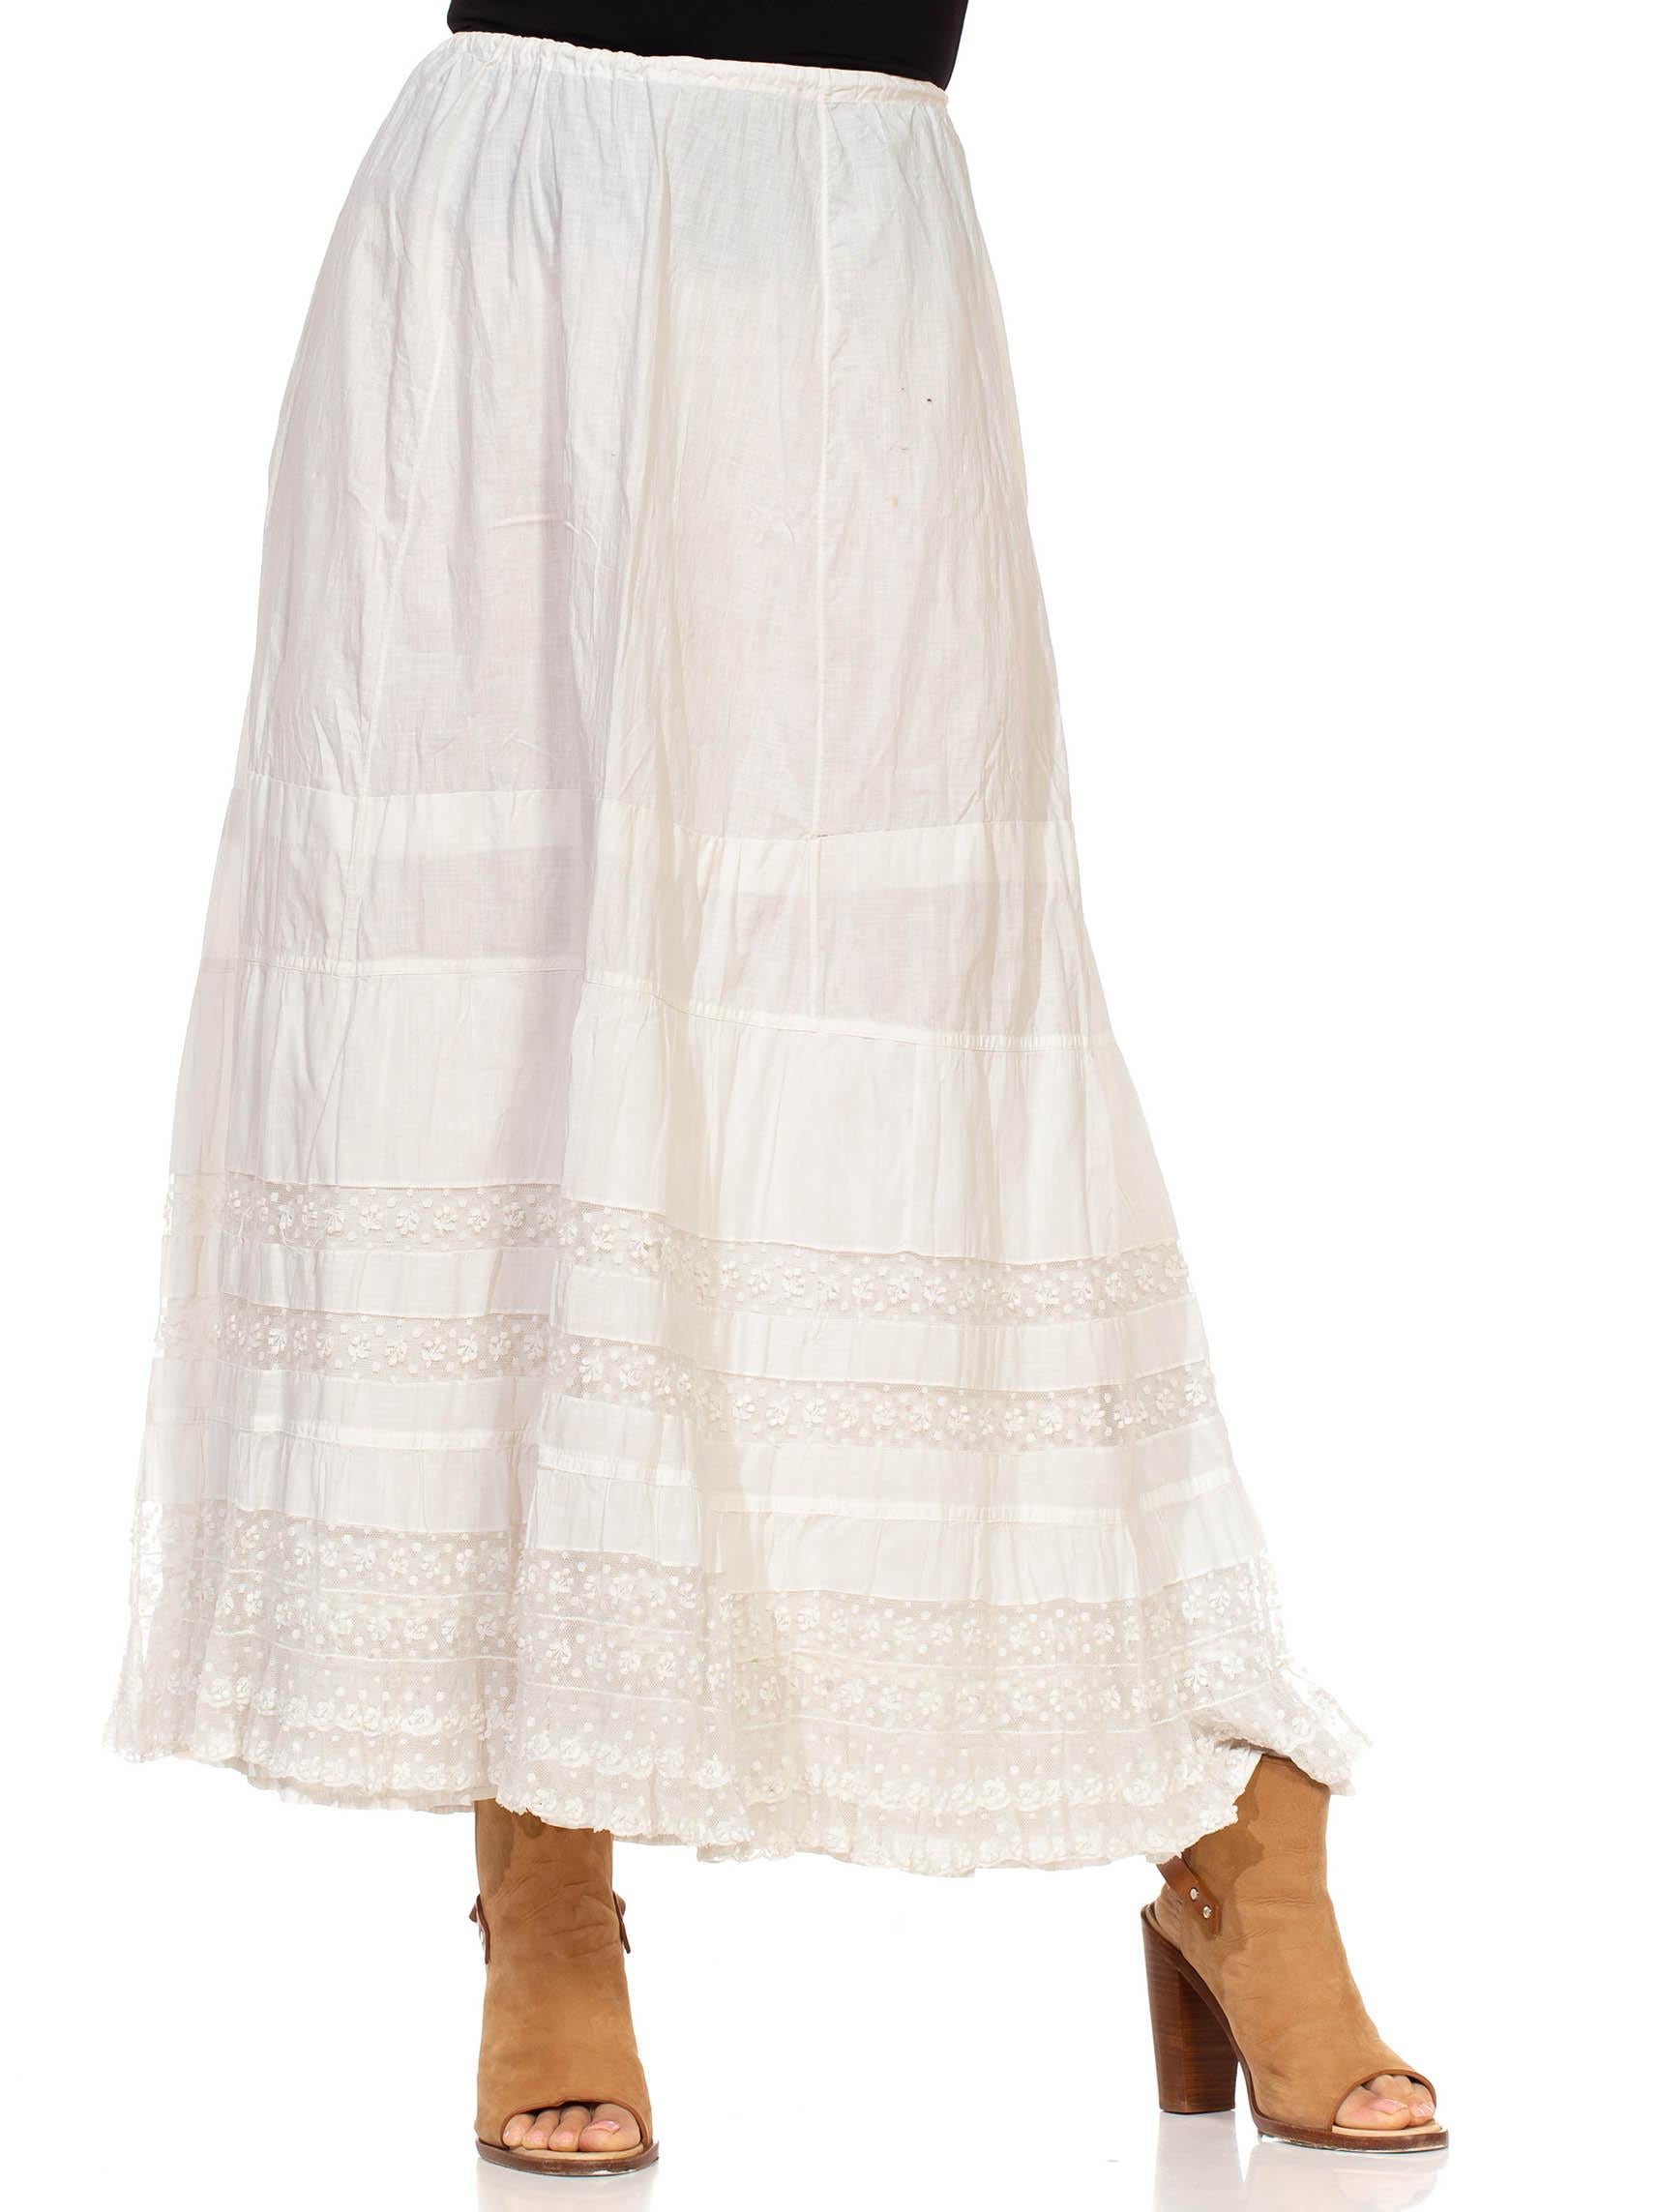 Women's Victorian White Organic Cotton Skirt With Cherry Lace For Sale